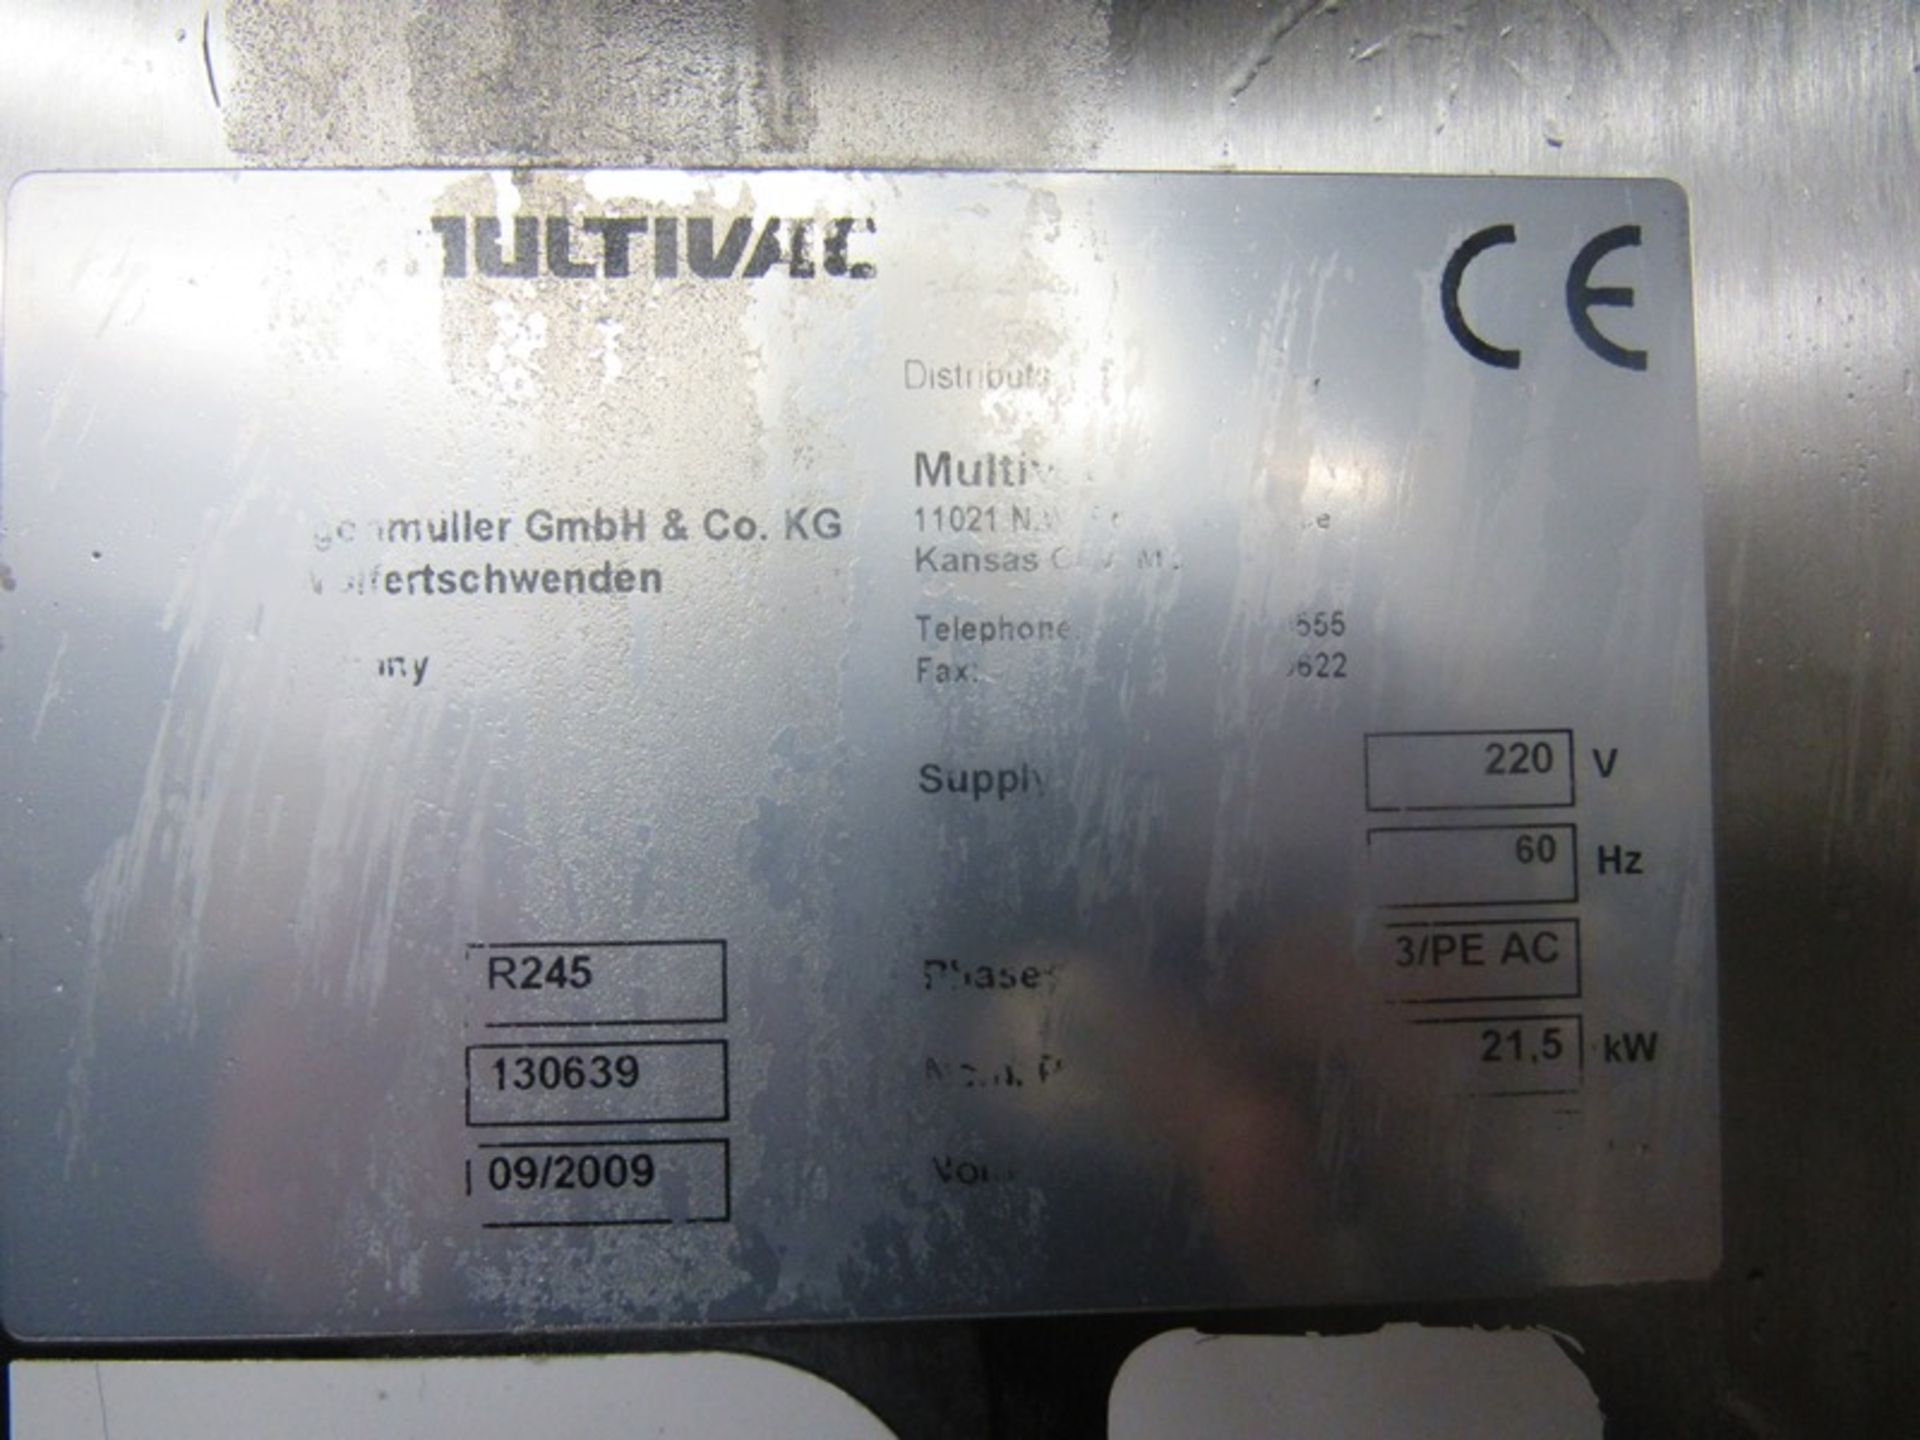 Multivac Mdl. R245 Rollstock Thermoformer, Ser. #130639, Mfg. 2009, 220 volts, 420 mm between chains - Image 26 of 28